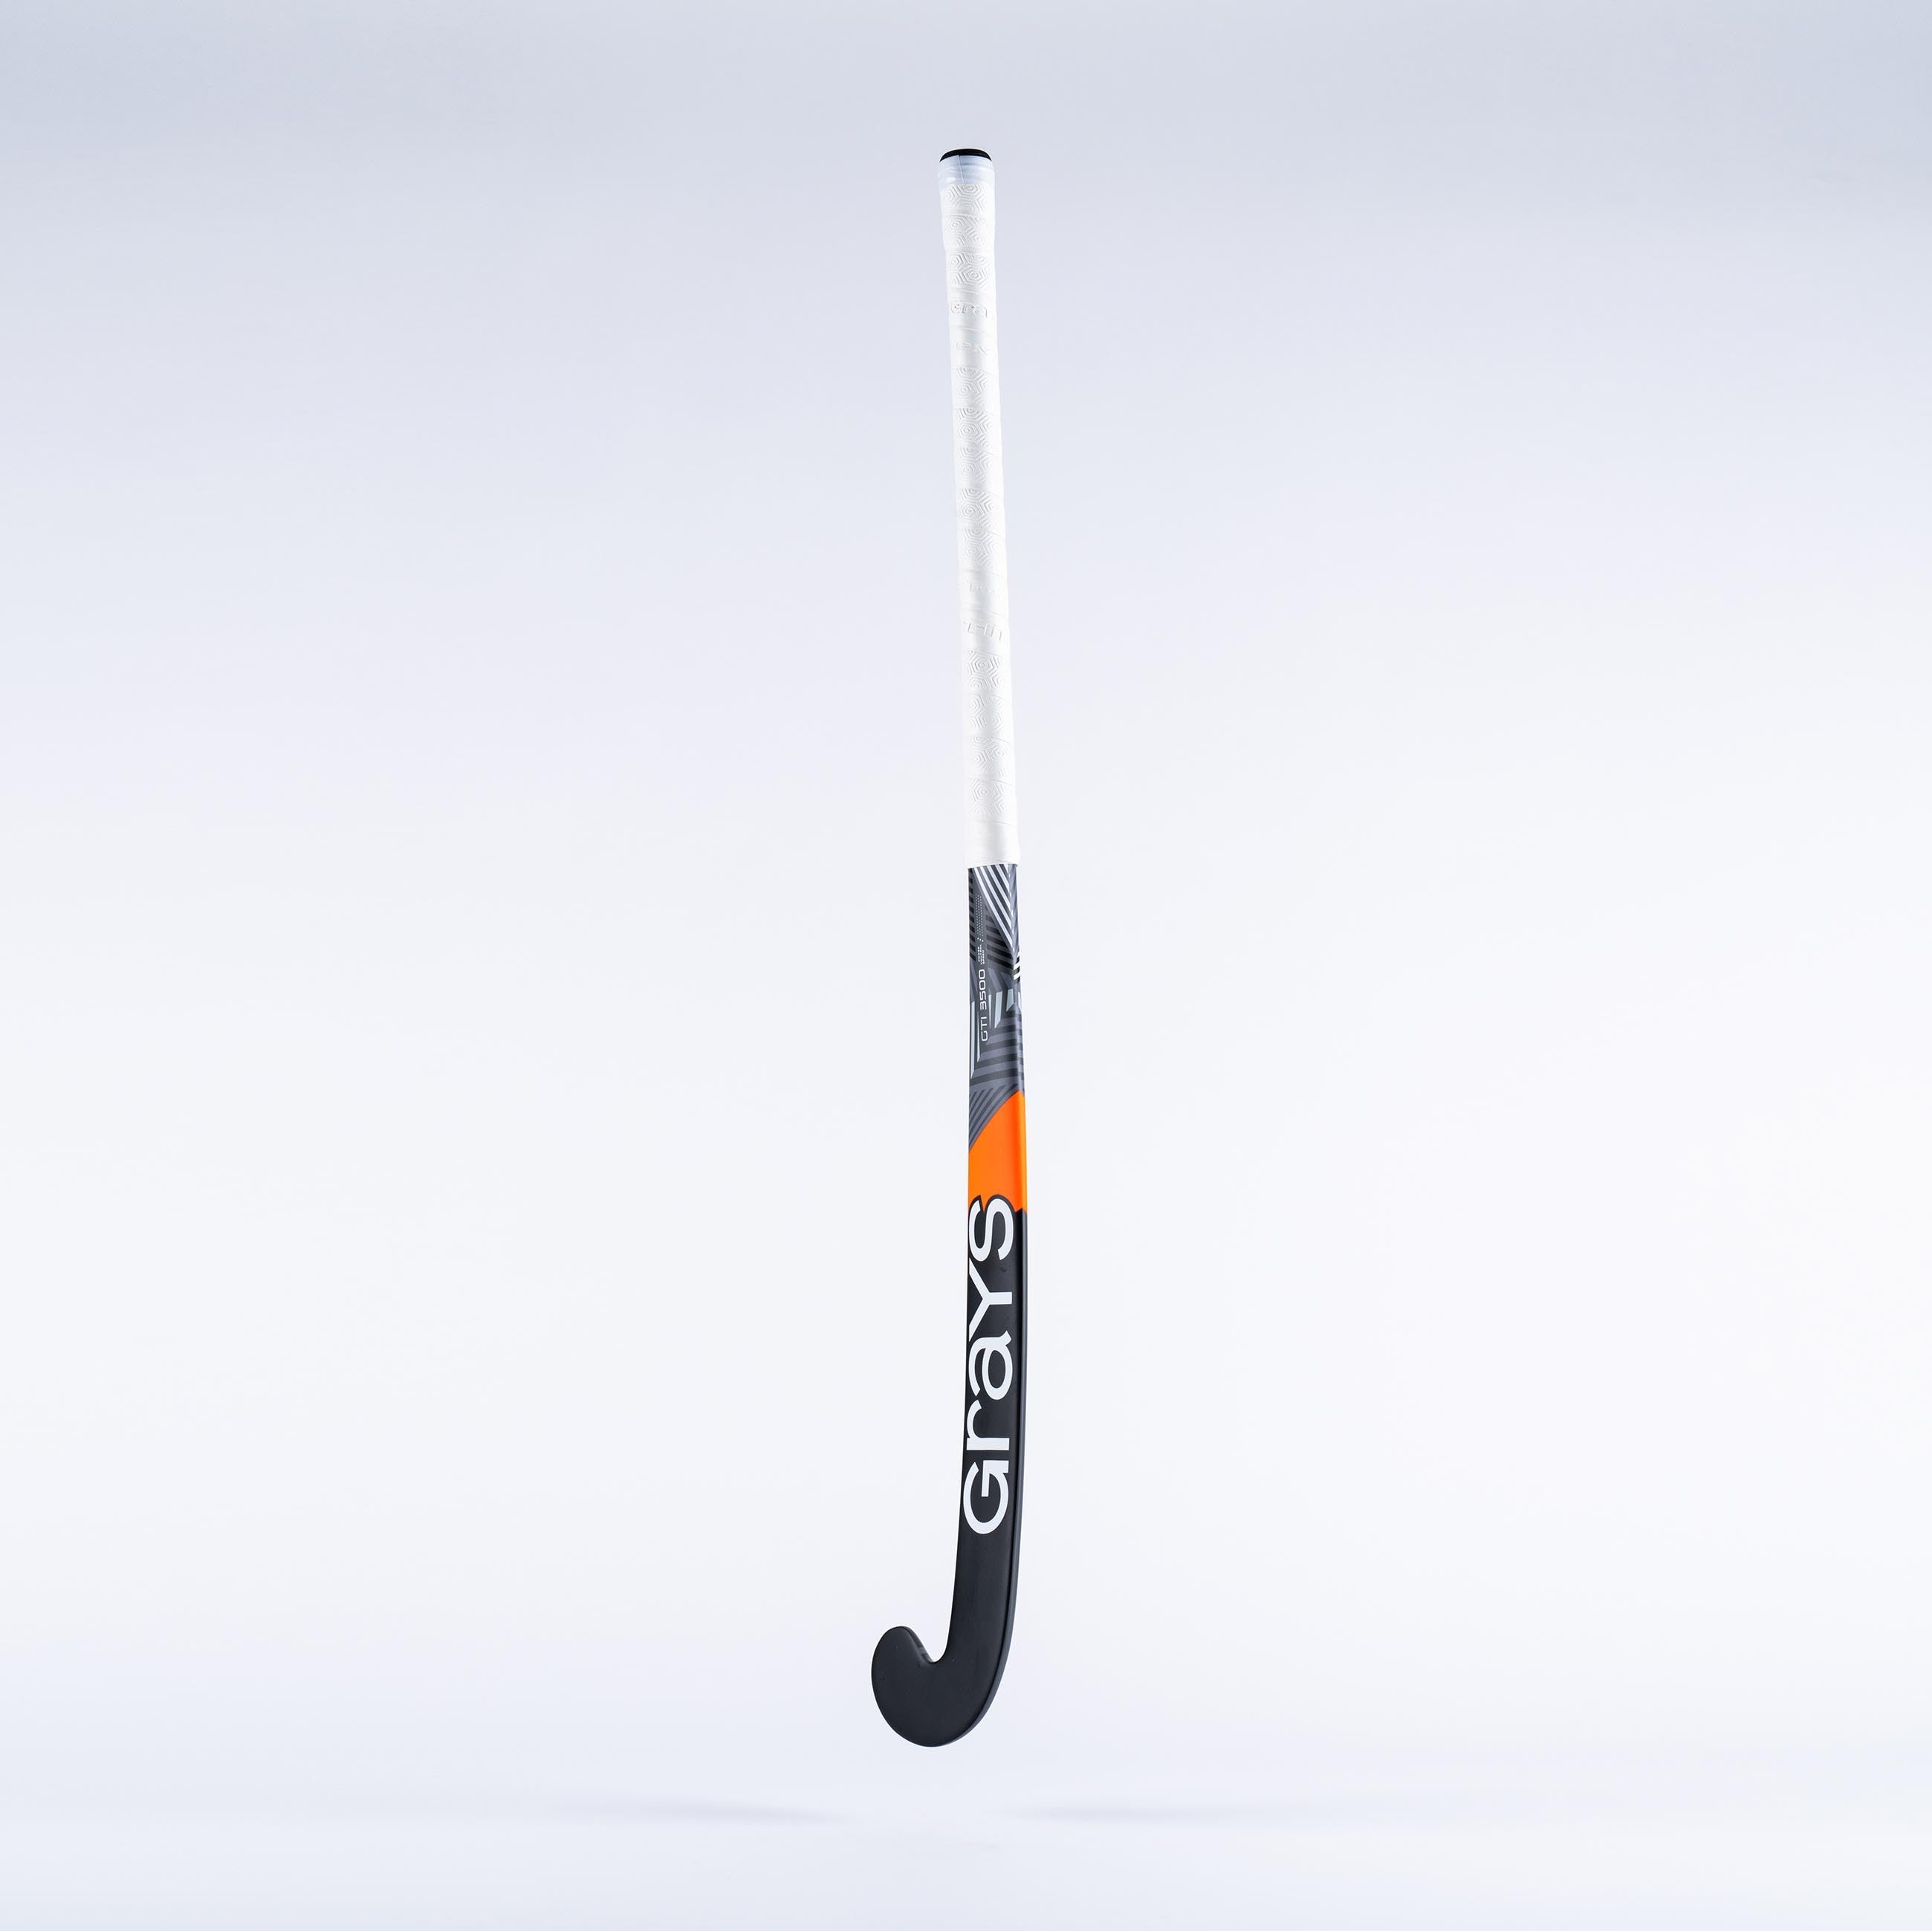 GTi3500 Dynabow Composite Indoor Hockey Stick